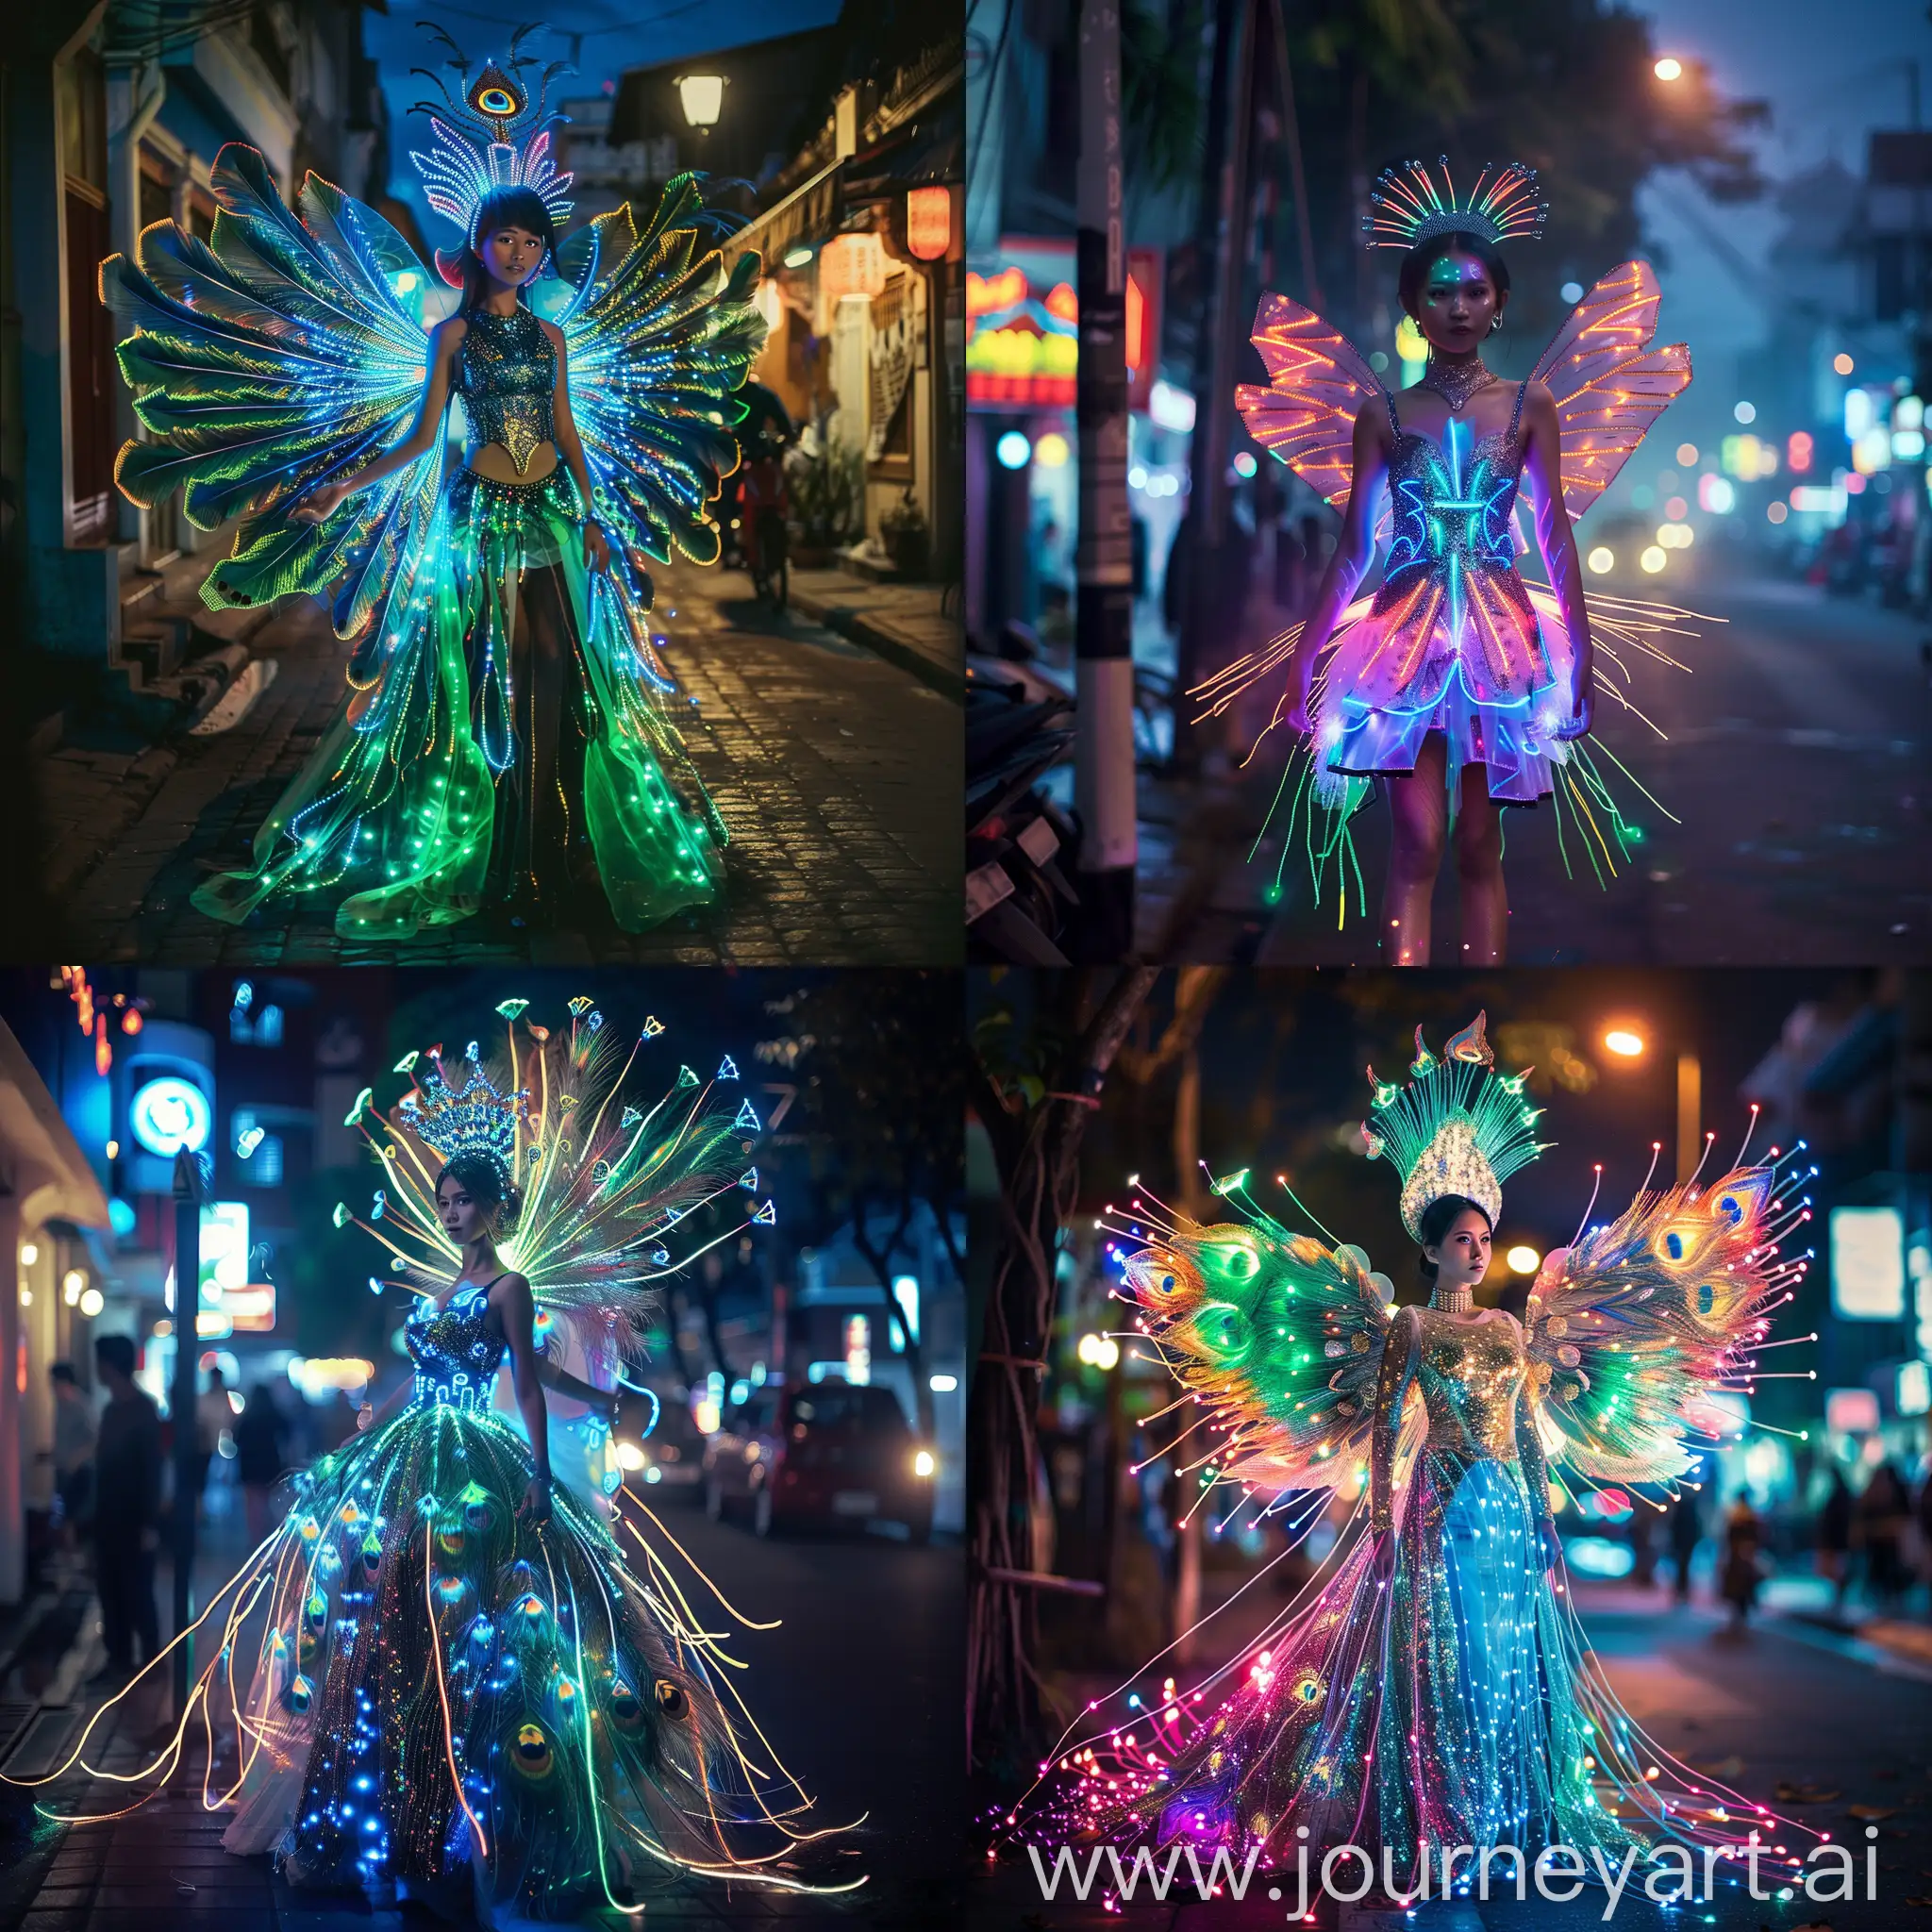 full body fashion photo features a beautiful Indonesian woman in a neon lights dress with futuristic hair accessories and holographic wings made from charming peacock feathers and fiber optic lights. Set in the streets of Bandung city at night, this image highlights a detailed portrait with depth of field